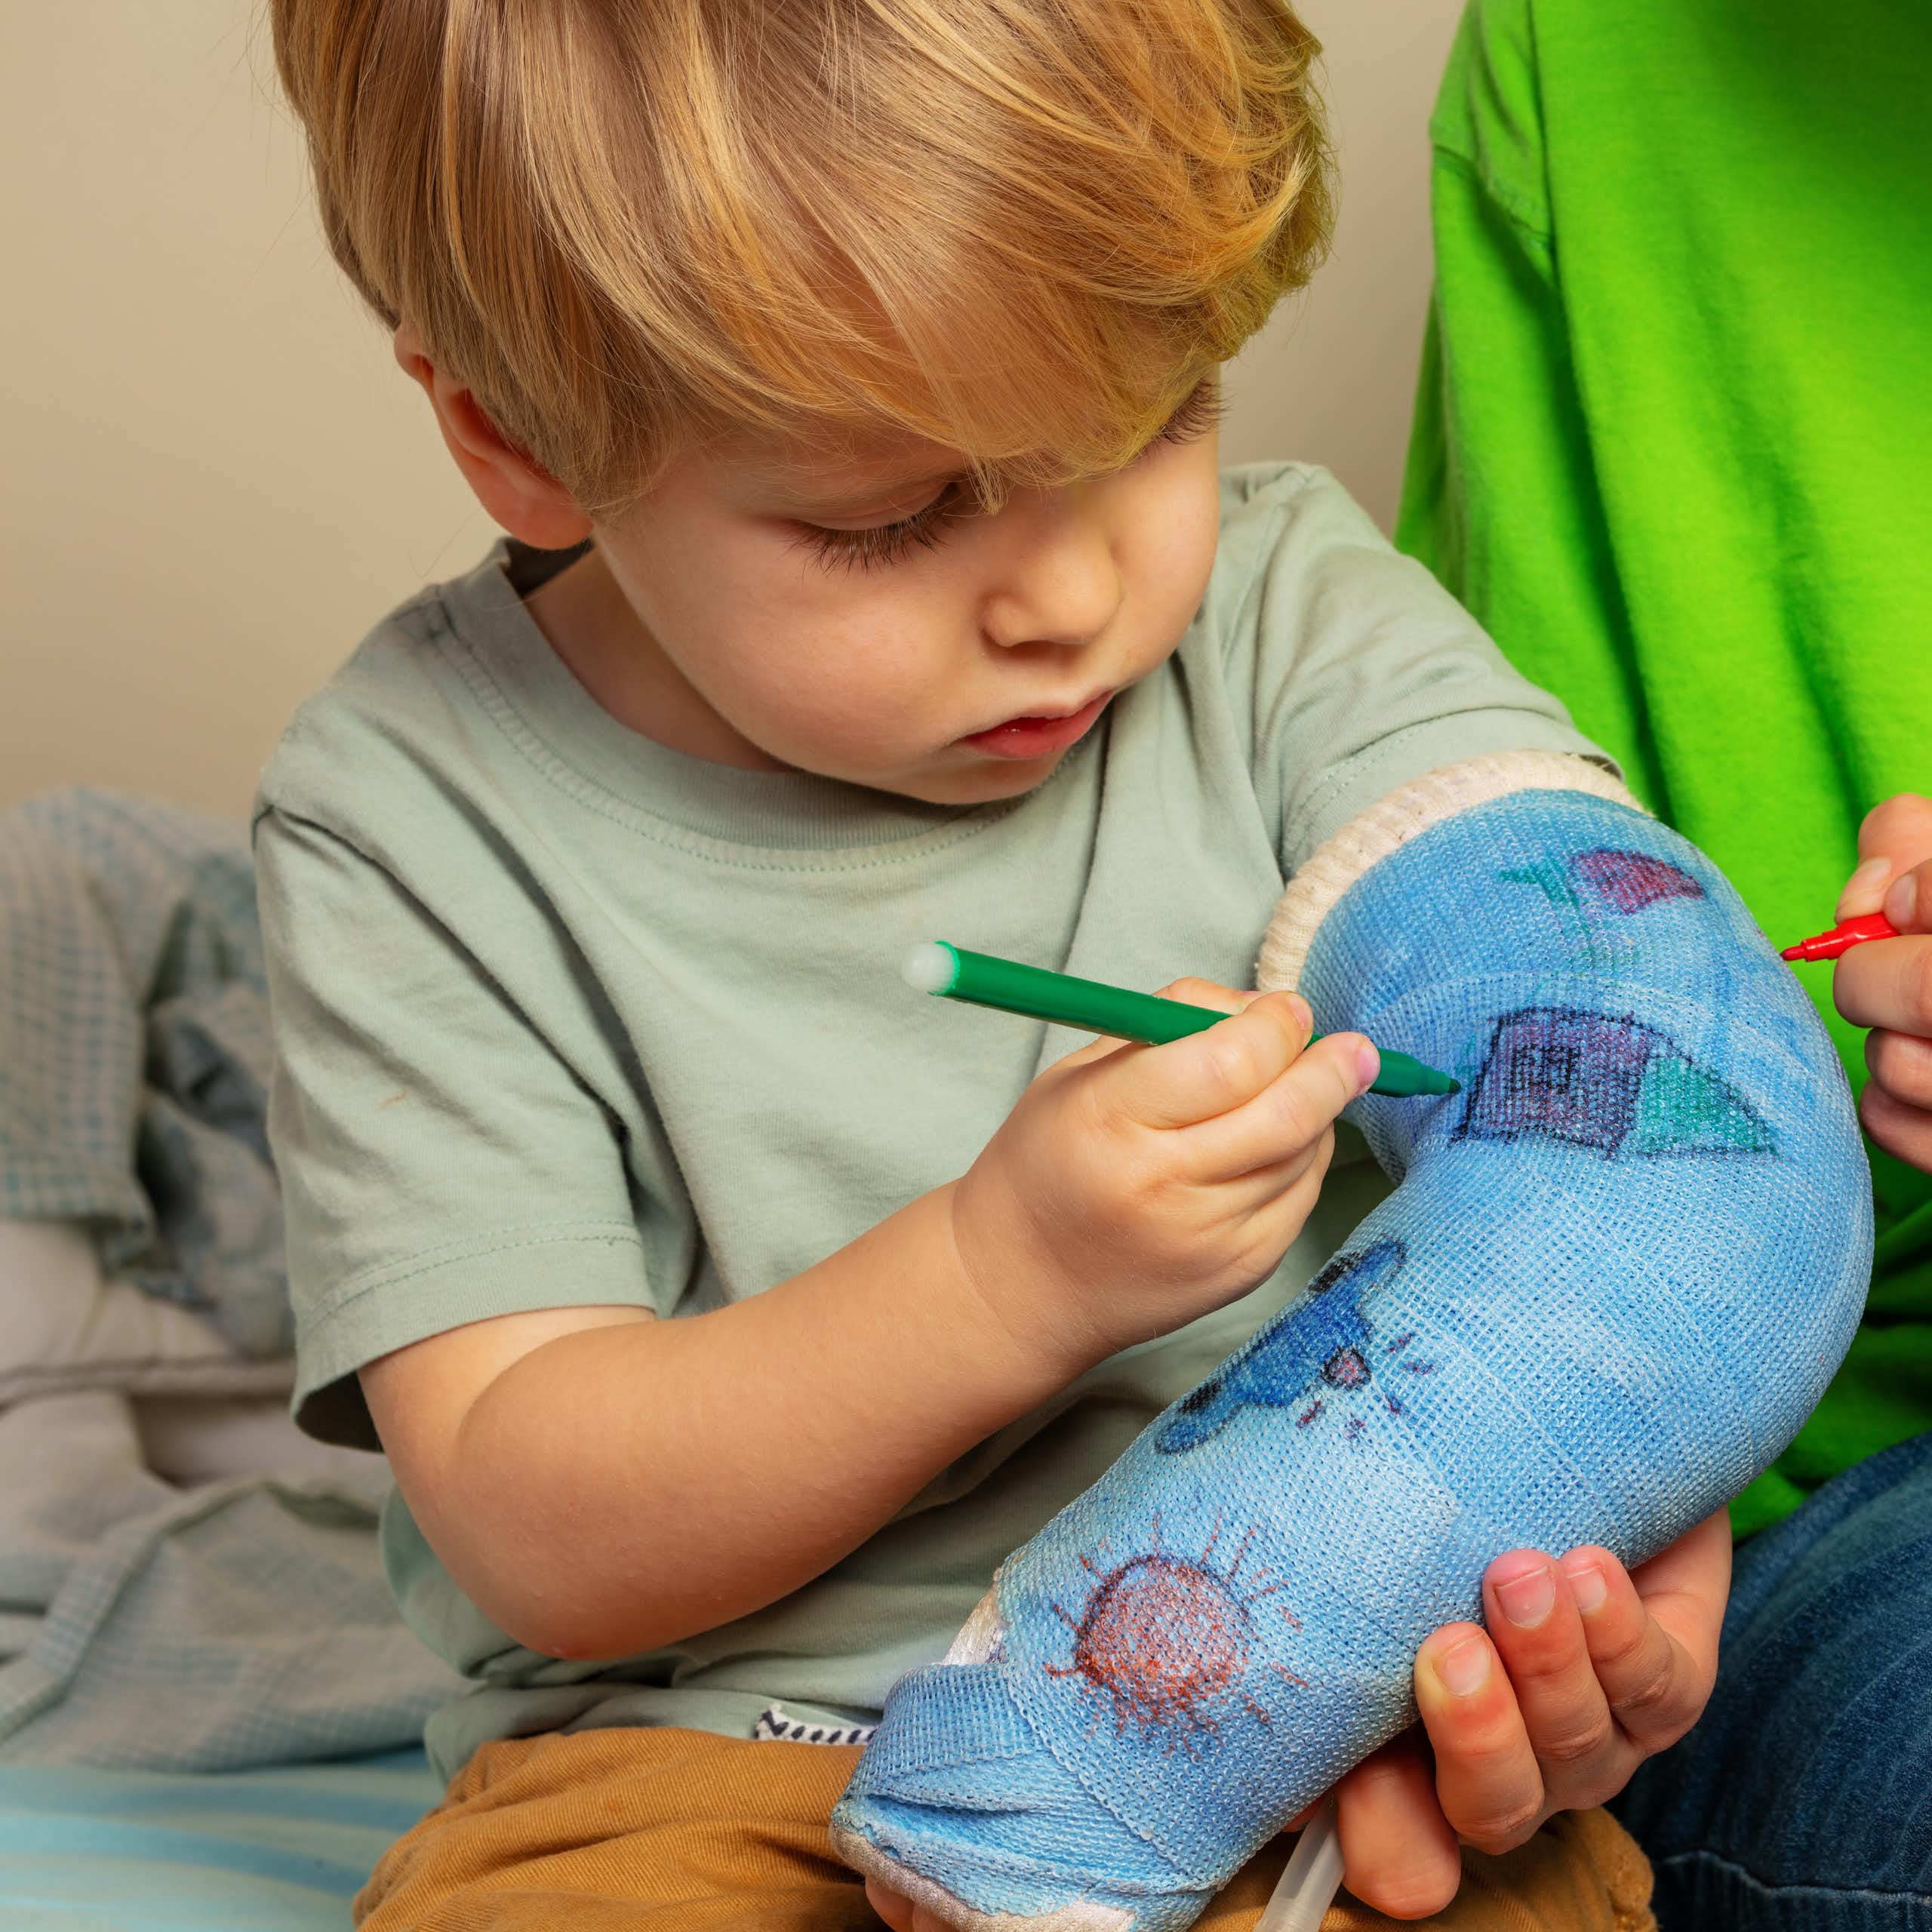 Boy with brother draw broken hand plaster cast painting childish drawings using felt-tip pen